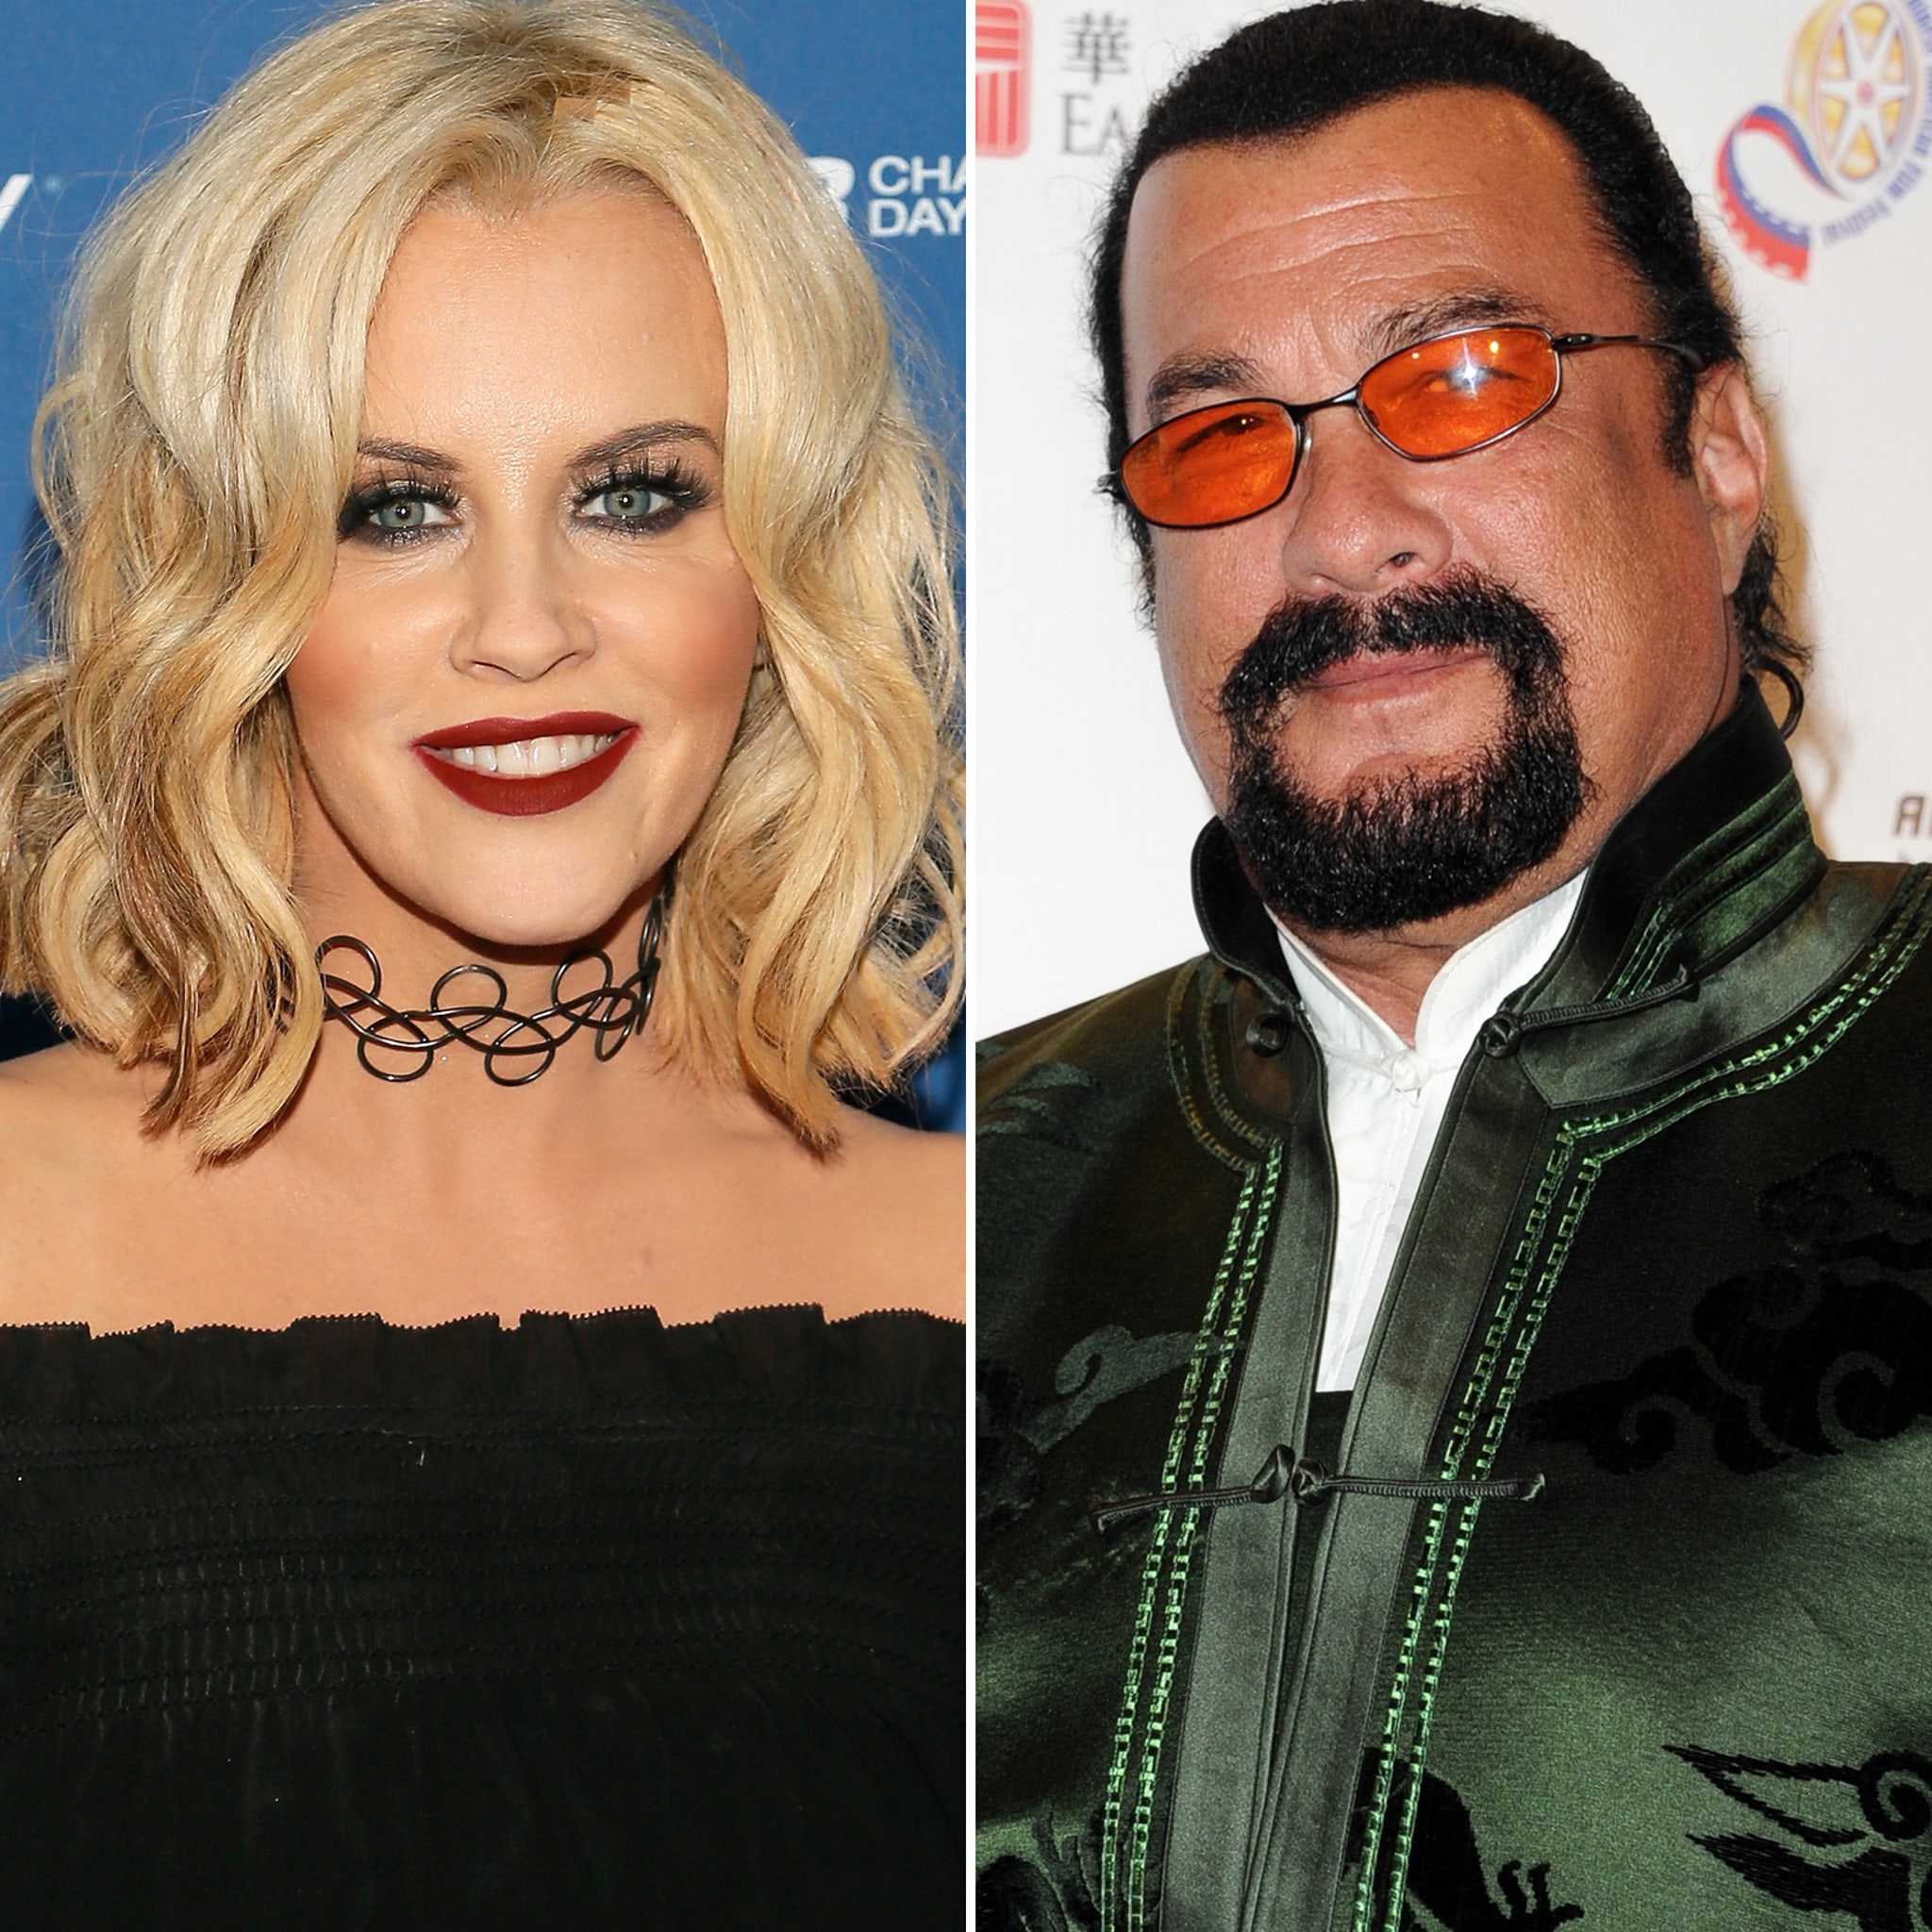 Jenny McCarthy: Steven Seagal told me to strip during Under Siege